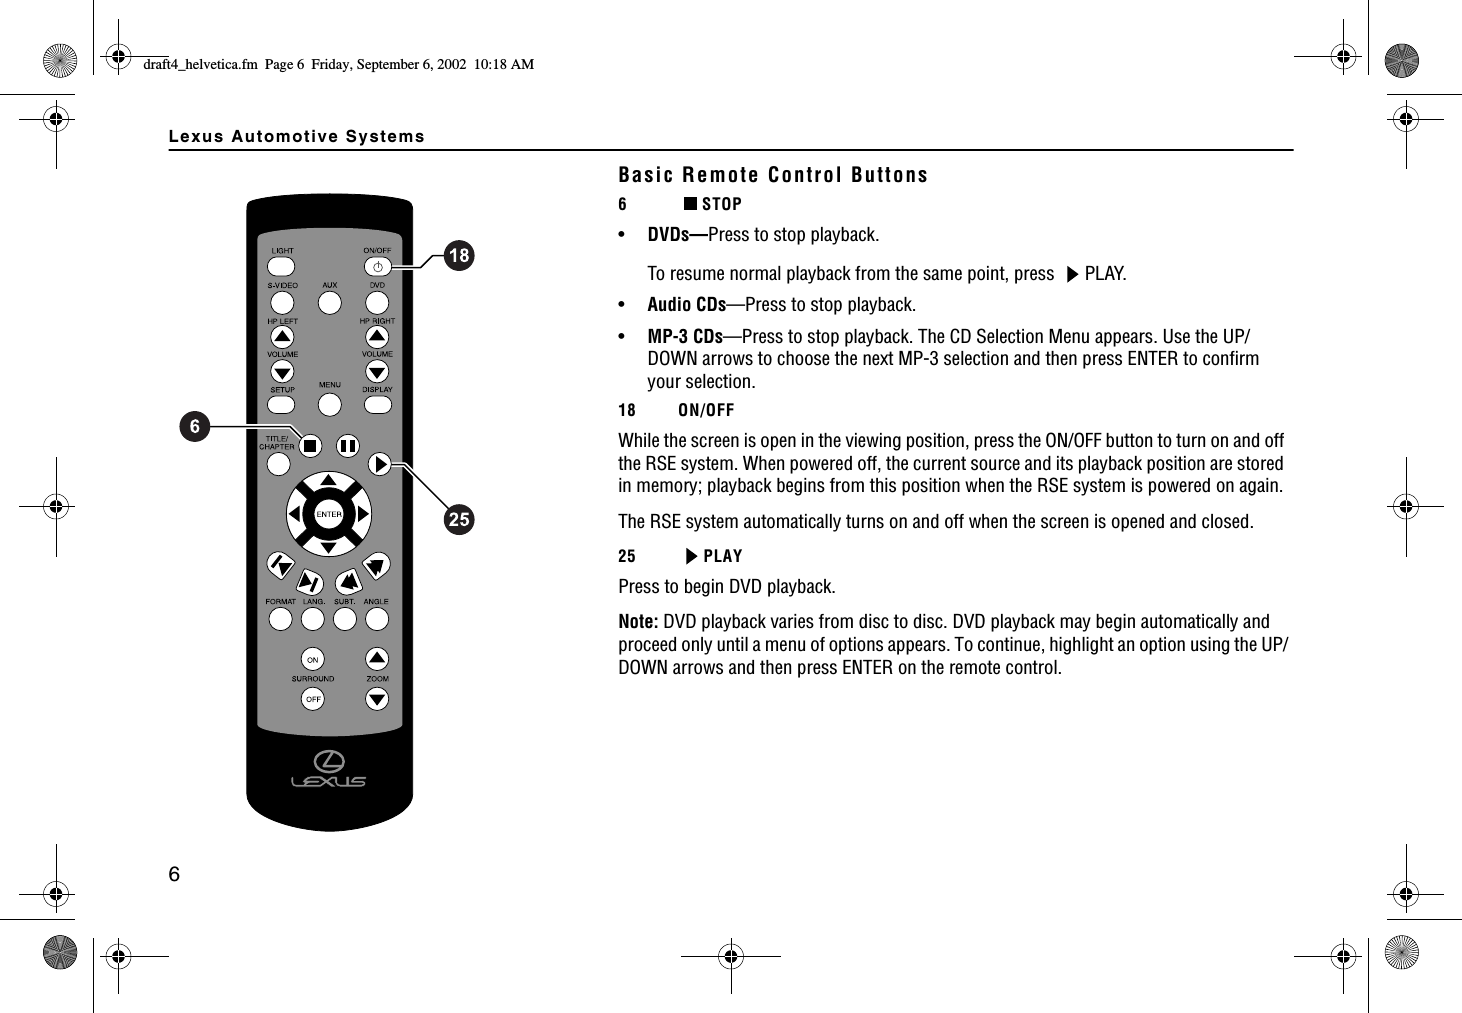 Lexus Automotive Systems6Basic Remote Control Buttons6STOP •DVDs—Press to stop playback. To resume normal playback from the same point, press  PLAY.•Audio CDs—Press to stop playback.•MP-3 CDs—Press to stop playback. The CD Selection Menu appears. Use the UP/DOWN arrows to choose the next MP-3 selection and then press ENTER to confirm your selection.18 ON/OFFWhile the screen is open in the viewing position, press the ON/OFF button to turn on and off the RSE system. When powered off, the current source and its playback position are stored in memory; playback begins from this position when the RSE system is powered on again.The RSE system automatically turns on and off when the screen is opened and closed.25 PLAYPress to begin DVD playback.Note: DVD playback varies from disc to disc. DVD playback may begin automatically and proceed only until a menu of options appears. To continue, highlight an option using the UP/DOWN arrows and then press ENTER on the remote control.FTCHVAJGNXGVKECHO2CIG(TKFC[5GRVGODGT#/